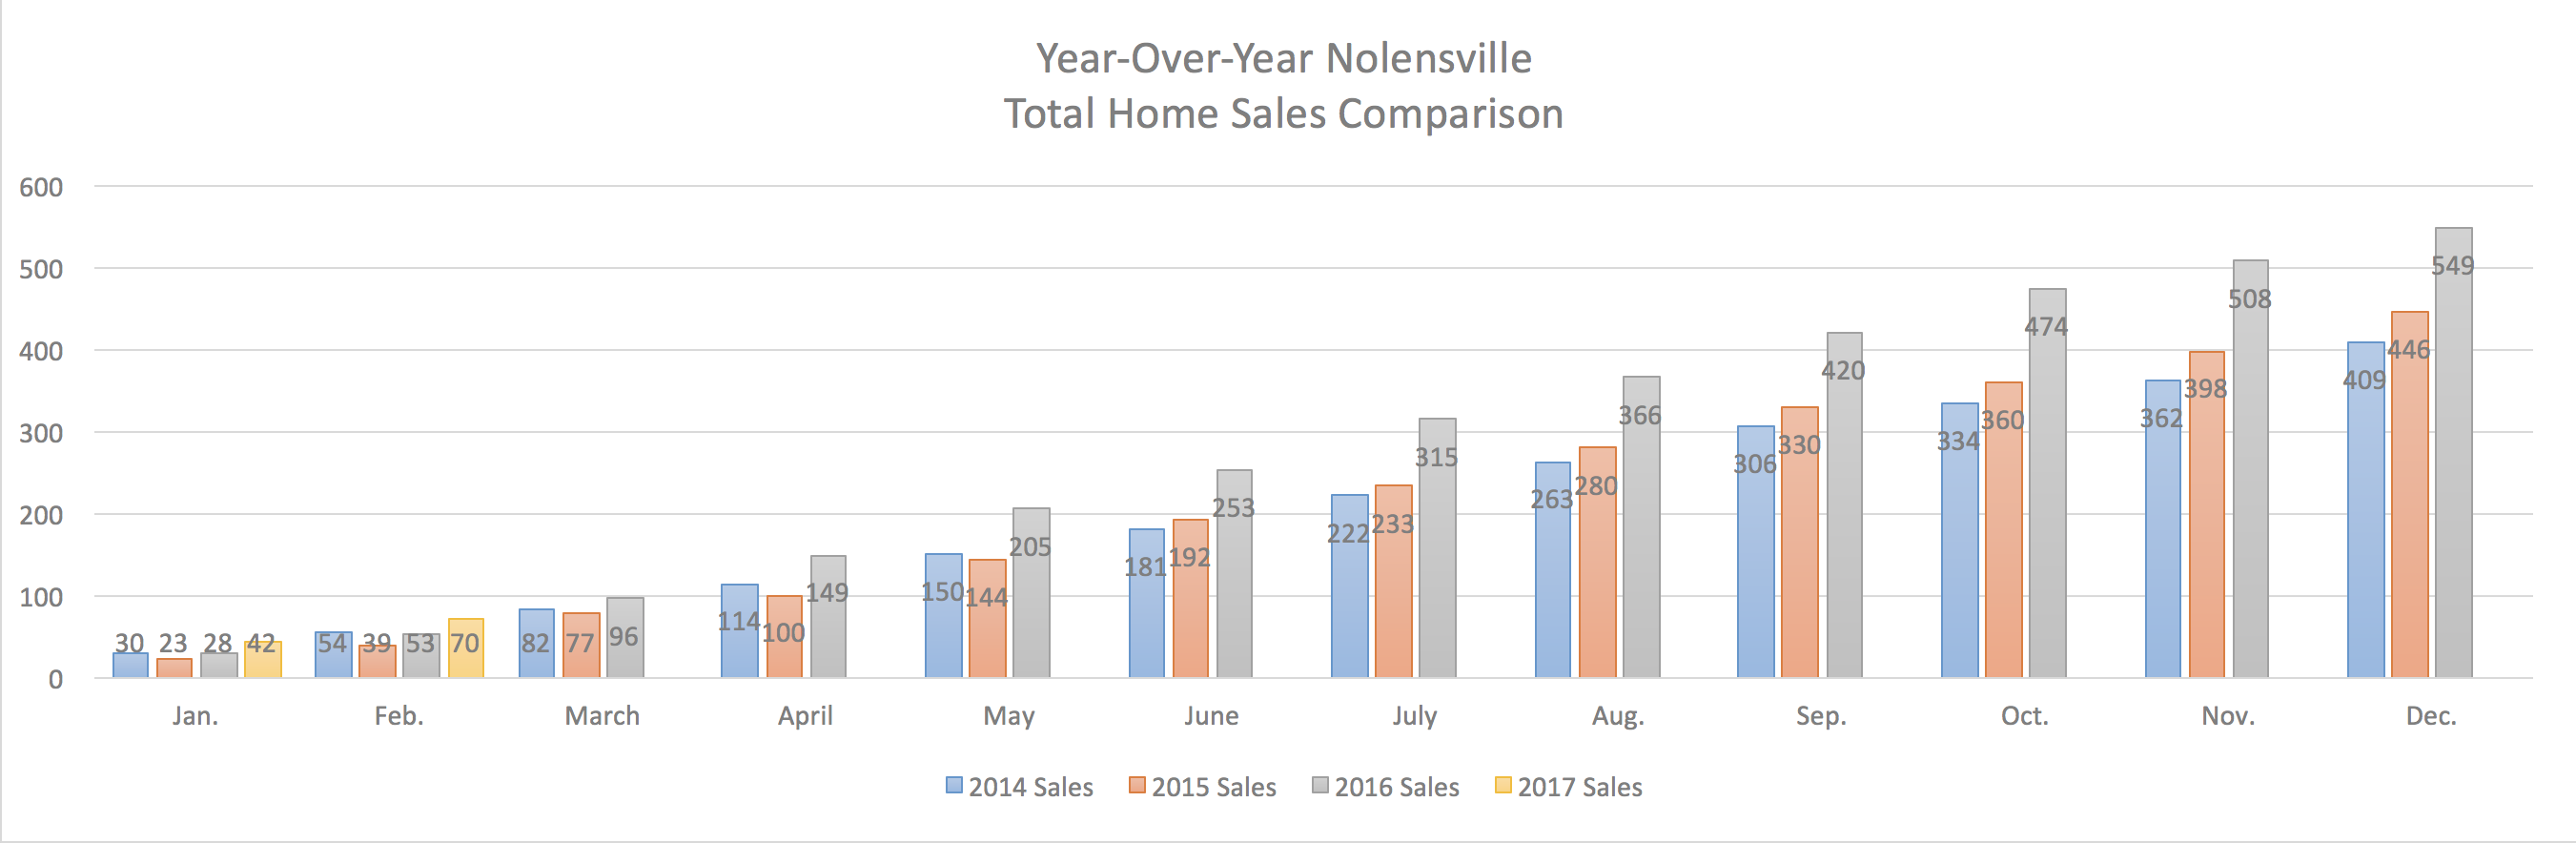 Nolensville Year-Over-Year Home Sales Through February 2017